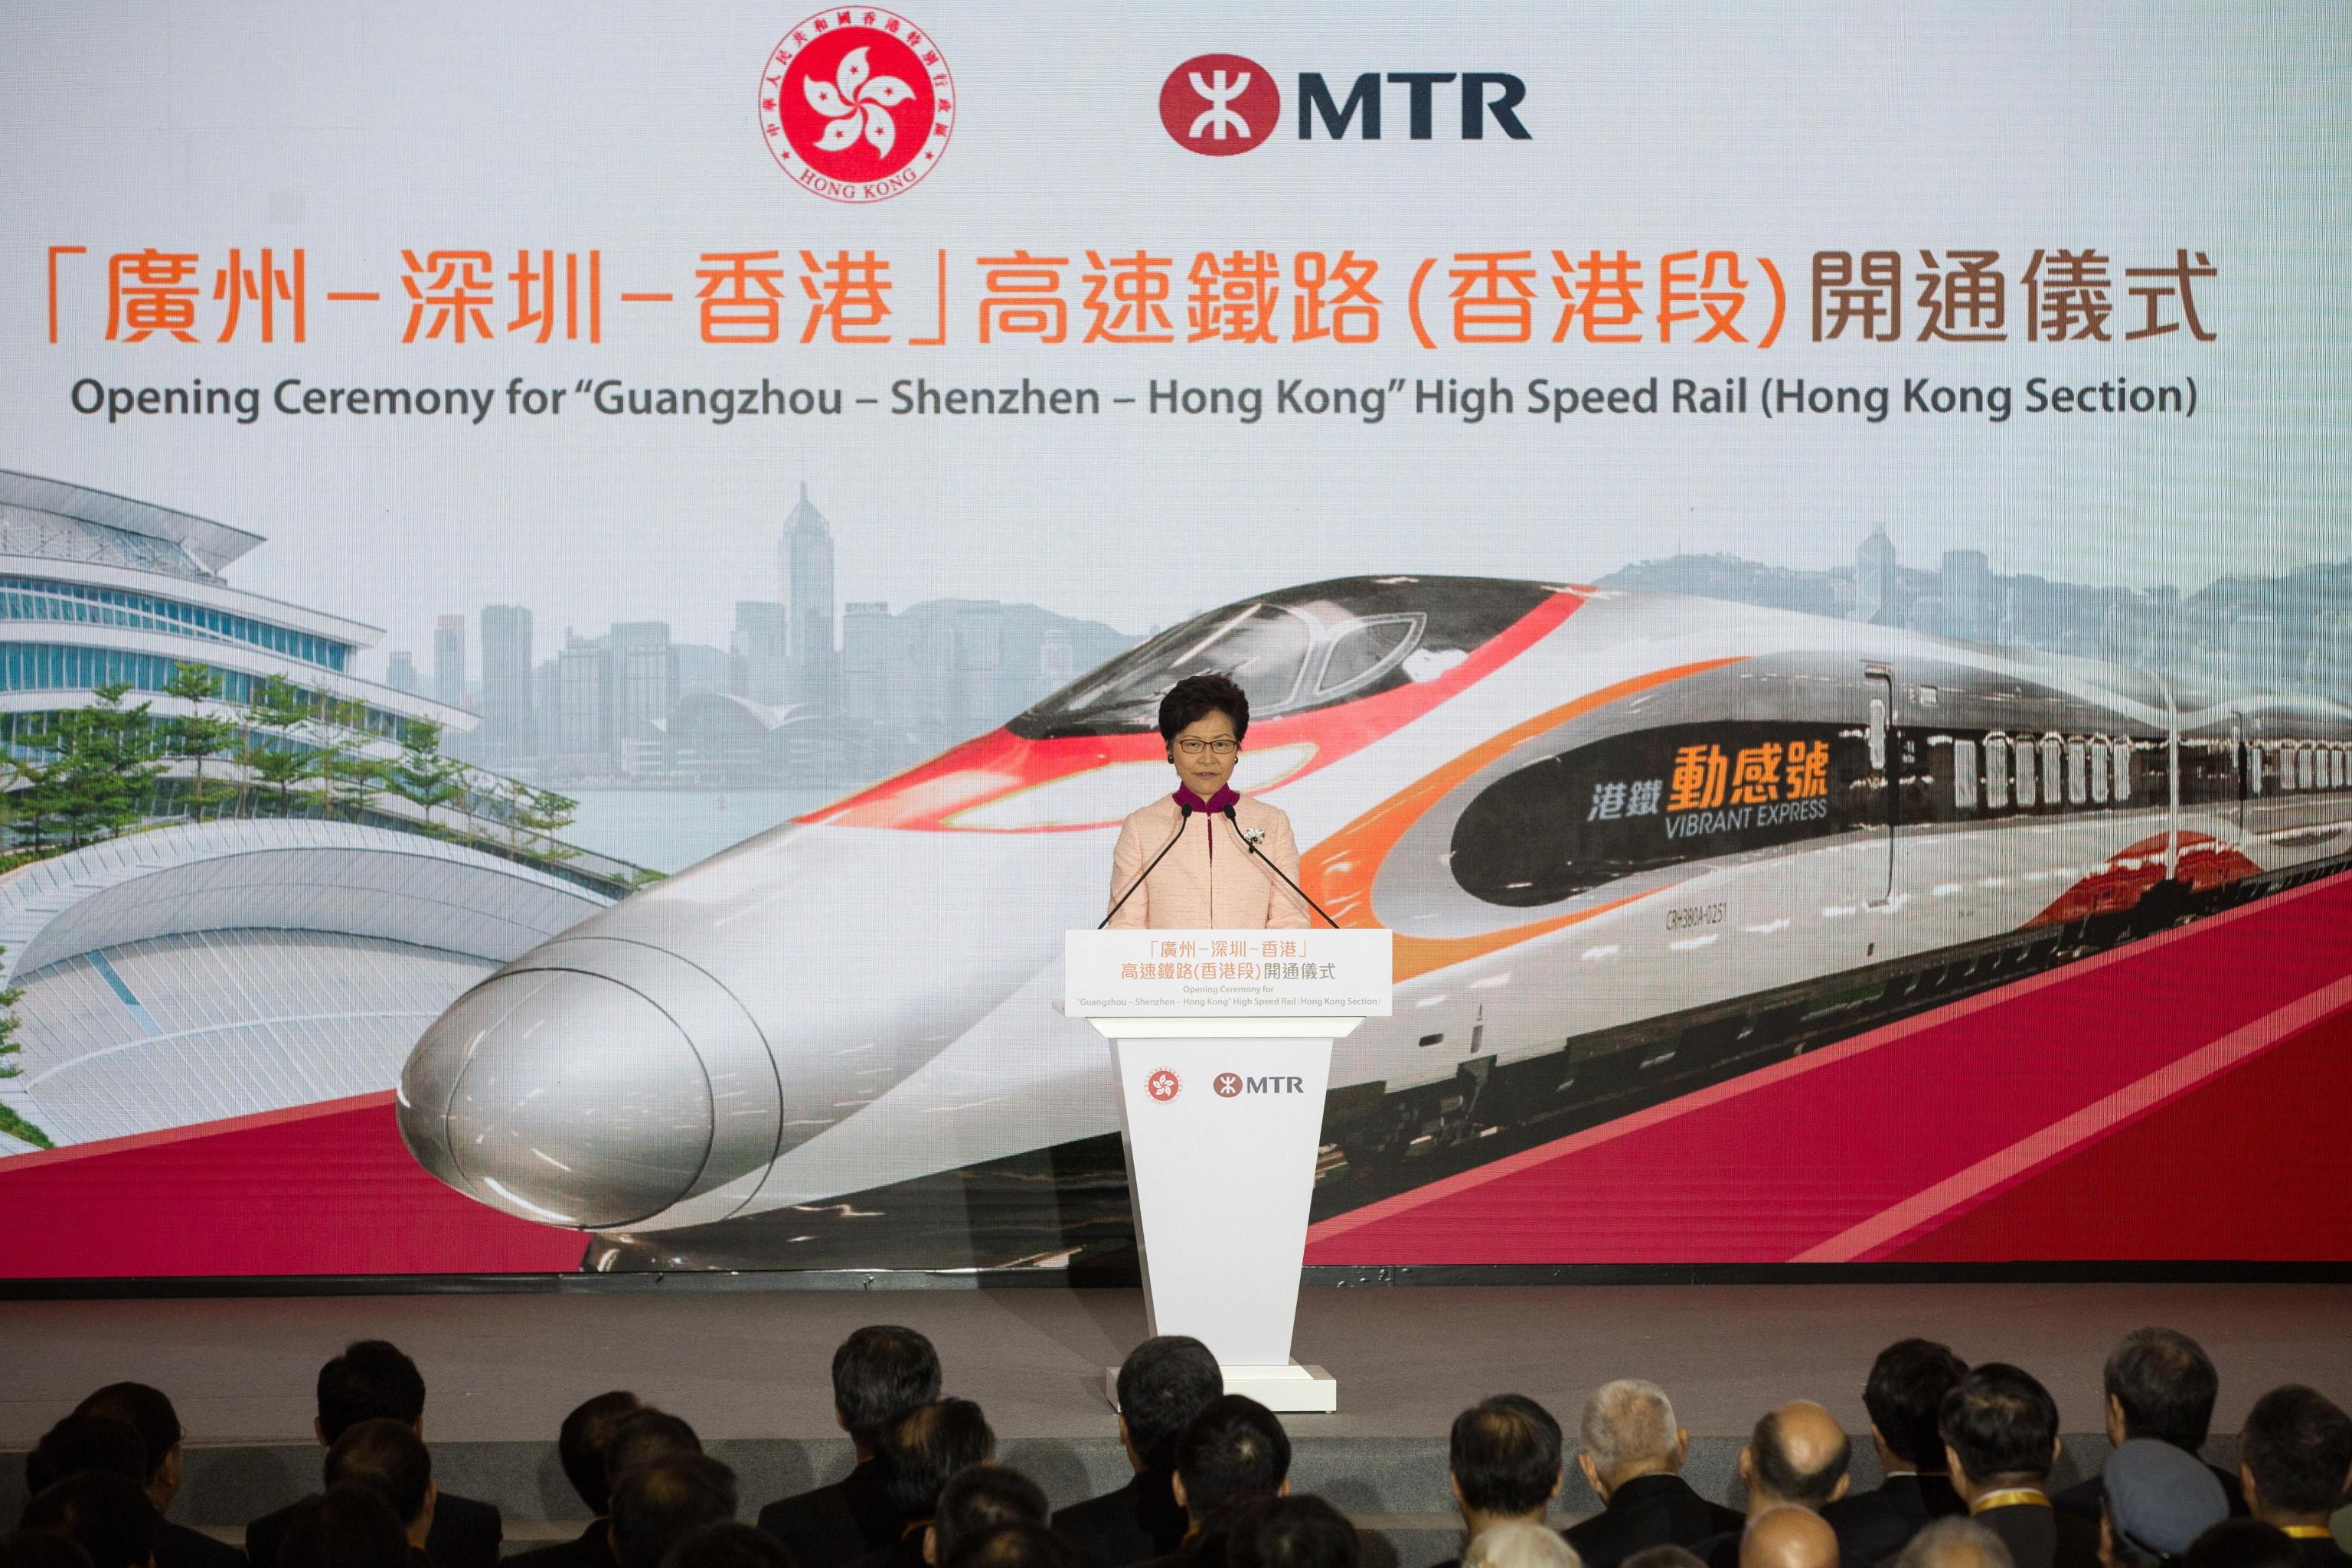 epa07038445 Hong Kong Chief Executive Carrie Lam officiates at the opening ceremony of the Hong Kong section of the Guangzhou-Shenzhen-Hong Kong Express Rail Link at Hong Kong West Kowloon Station in Hong Kong, China, 22 September 2018. After being delayed for three years and overshooting its cost estimate by a third, Hong Kong's cross-border high-speed rail link is finally set to serve its first passengers on 23 September.  EPA/JEROME FAVRE